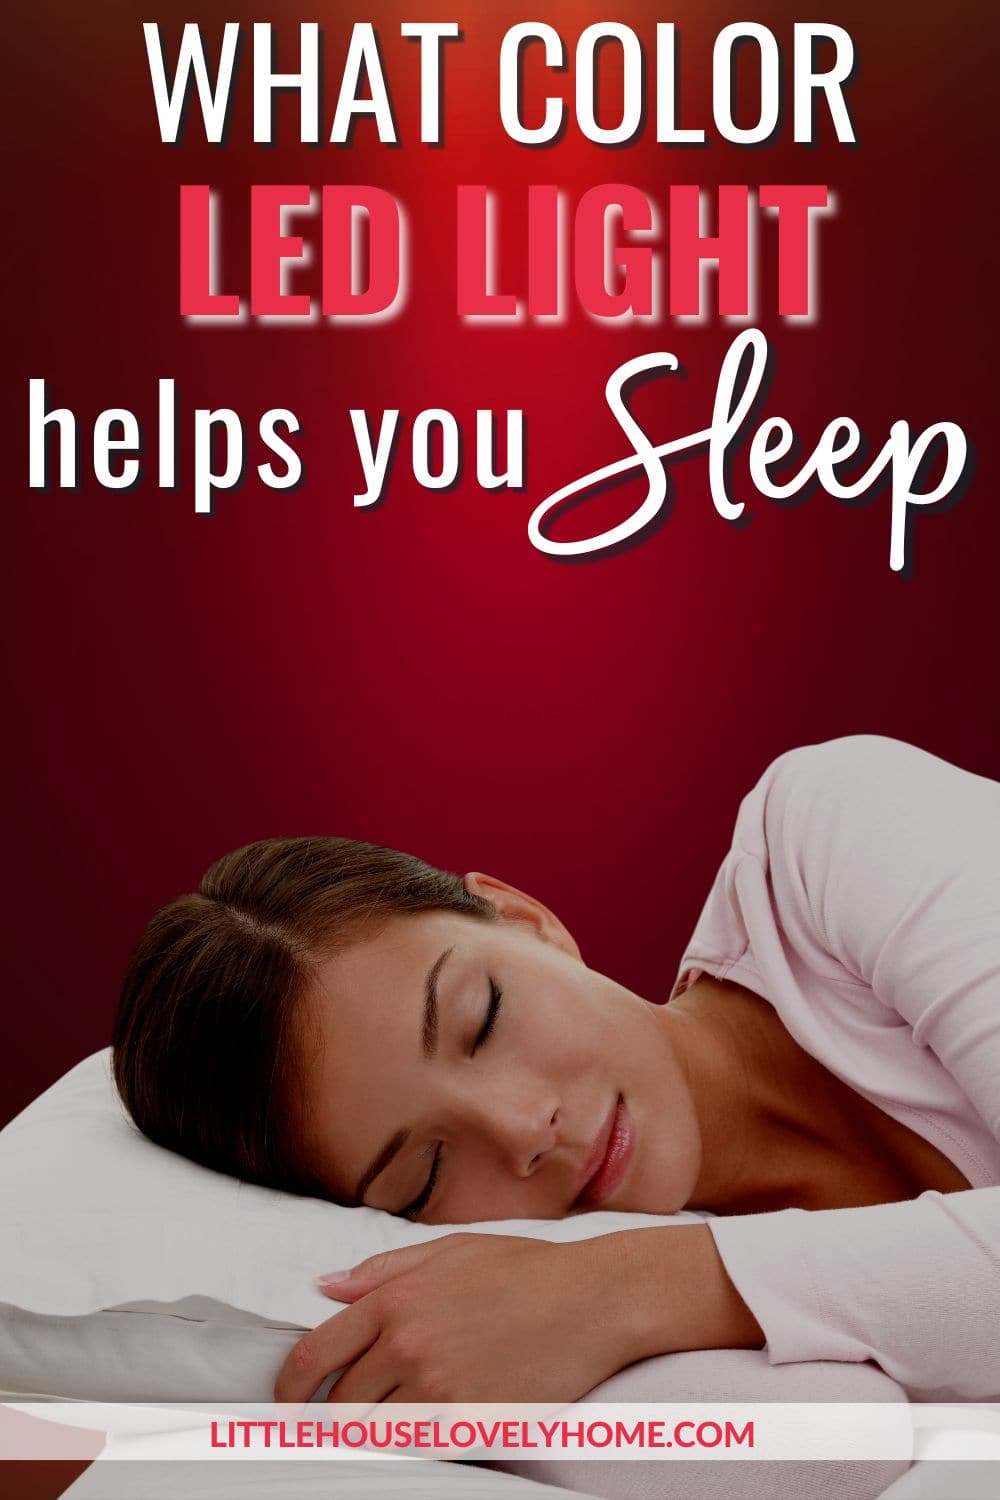 Photo of a sleeping woman with red light background ad text overlay that reads What Color Led Light Helps You Sleep